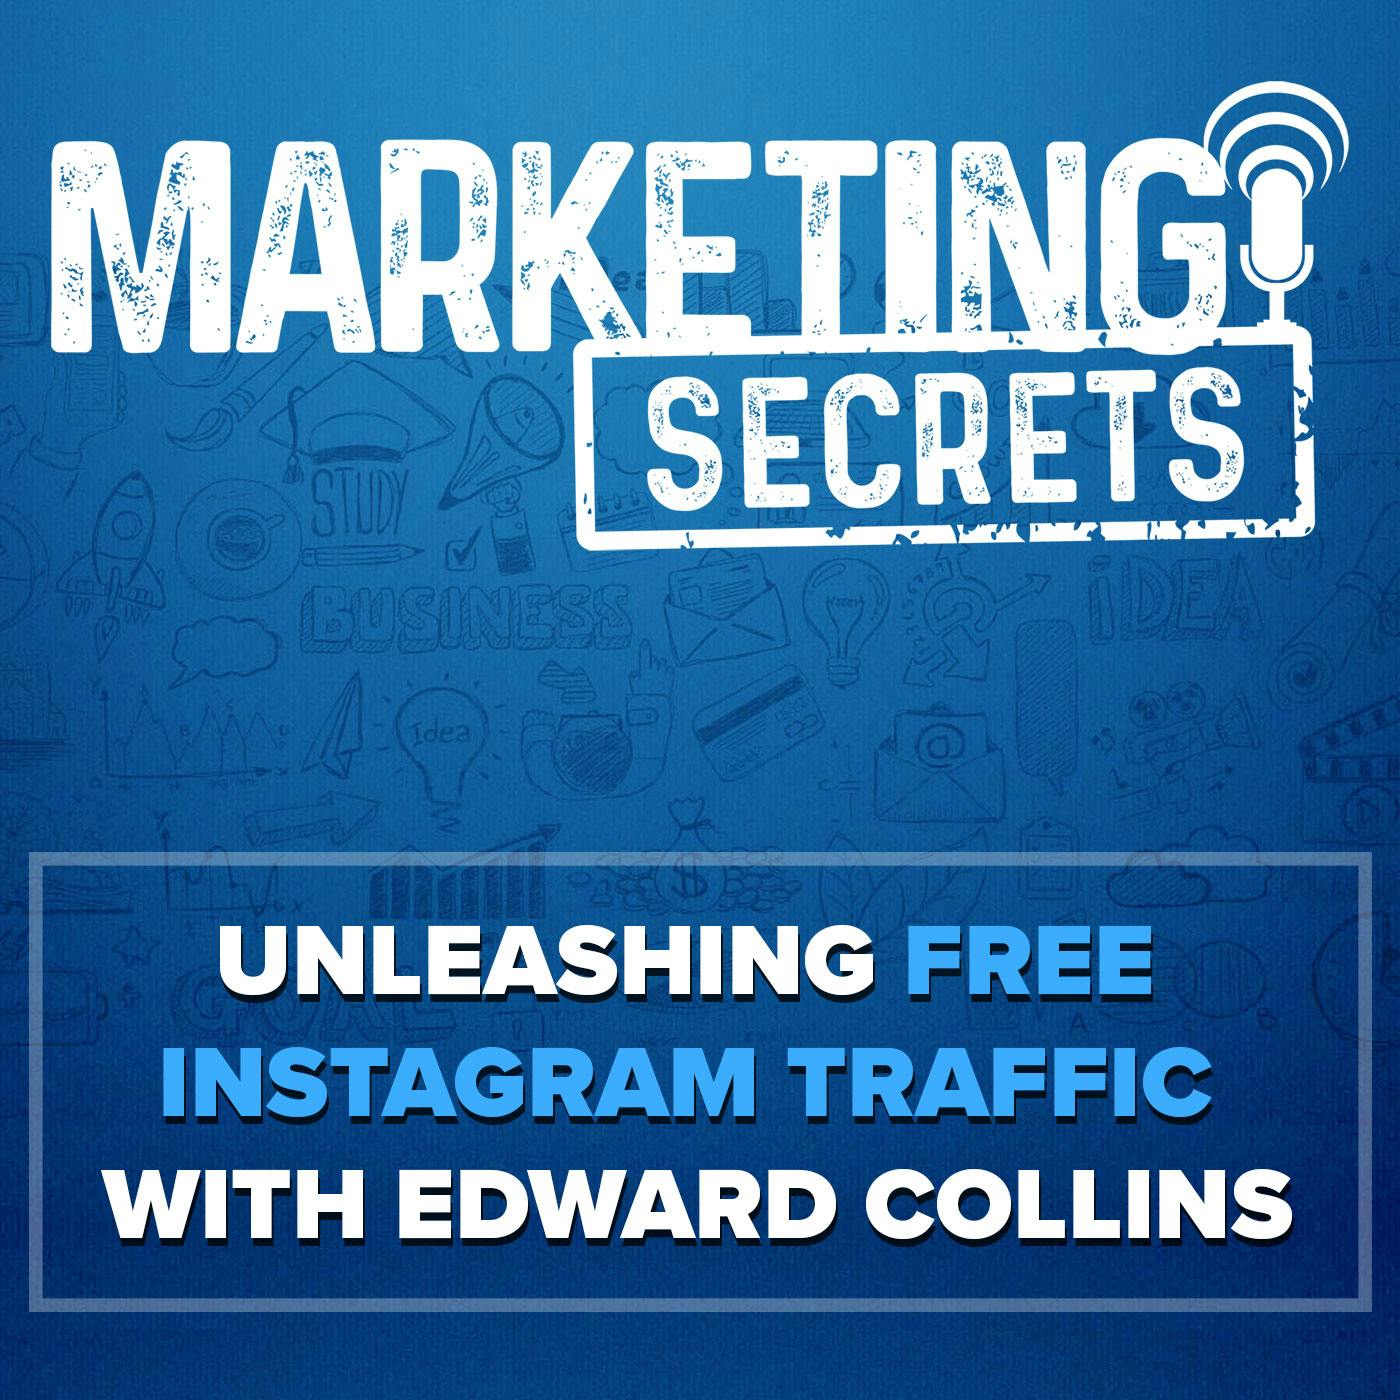 Unleashing Free Instagram Traffic with Edward Collins by Russell Brunson